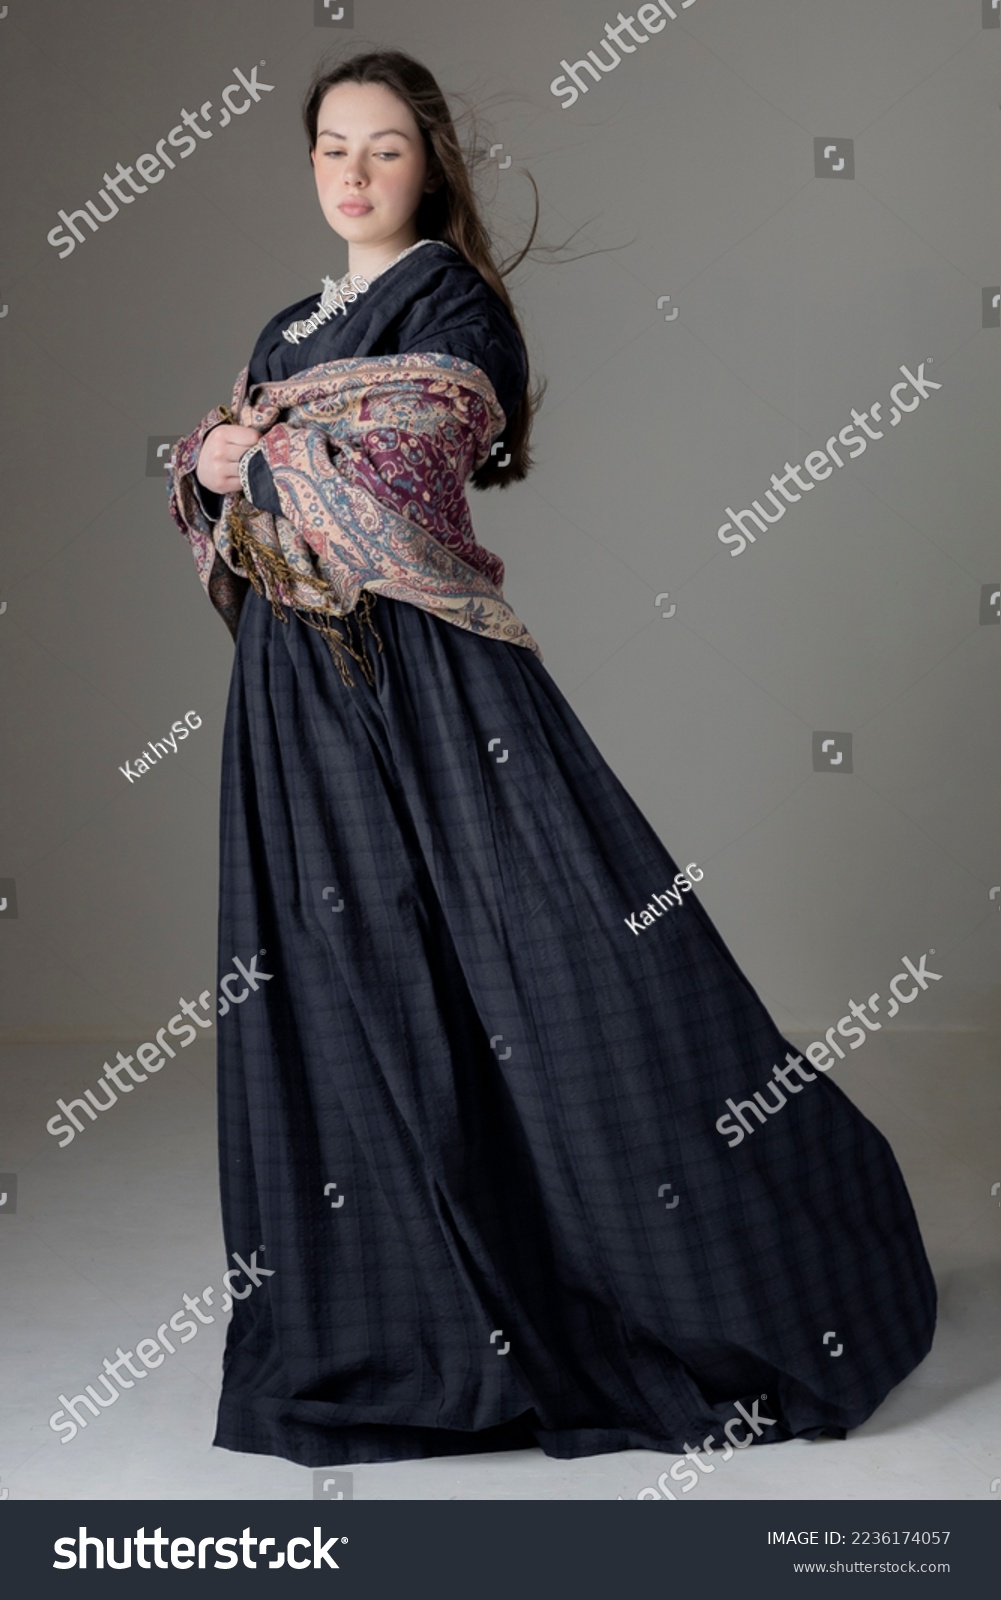 A young Victorian woman wearing a bluegrey cotton dress with a paisley shawl #2236174057